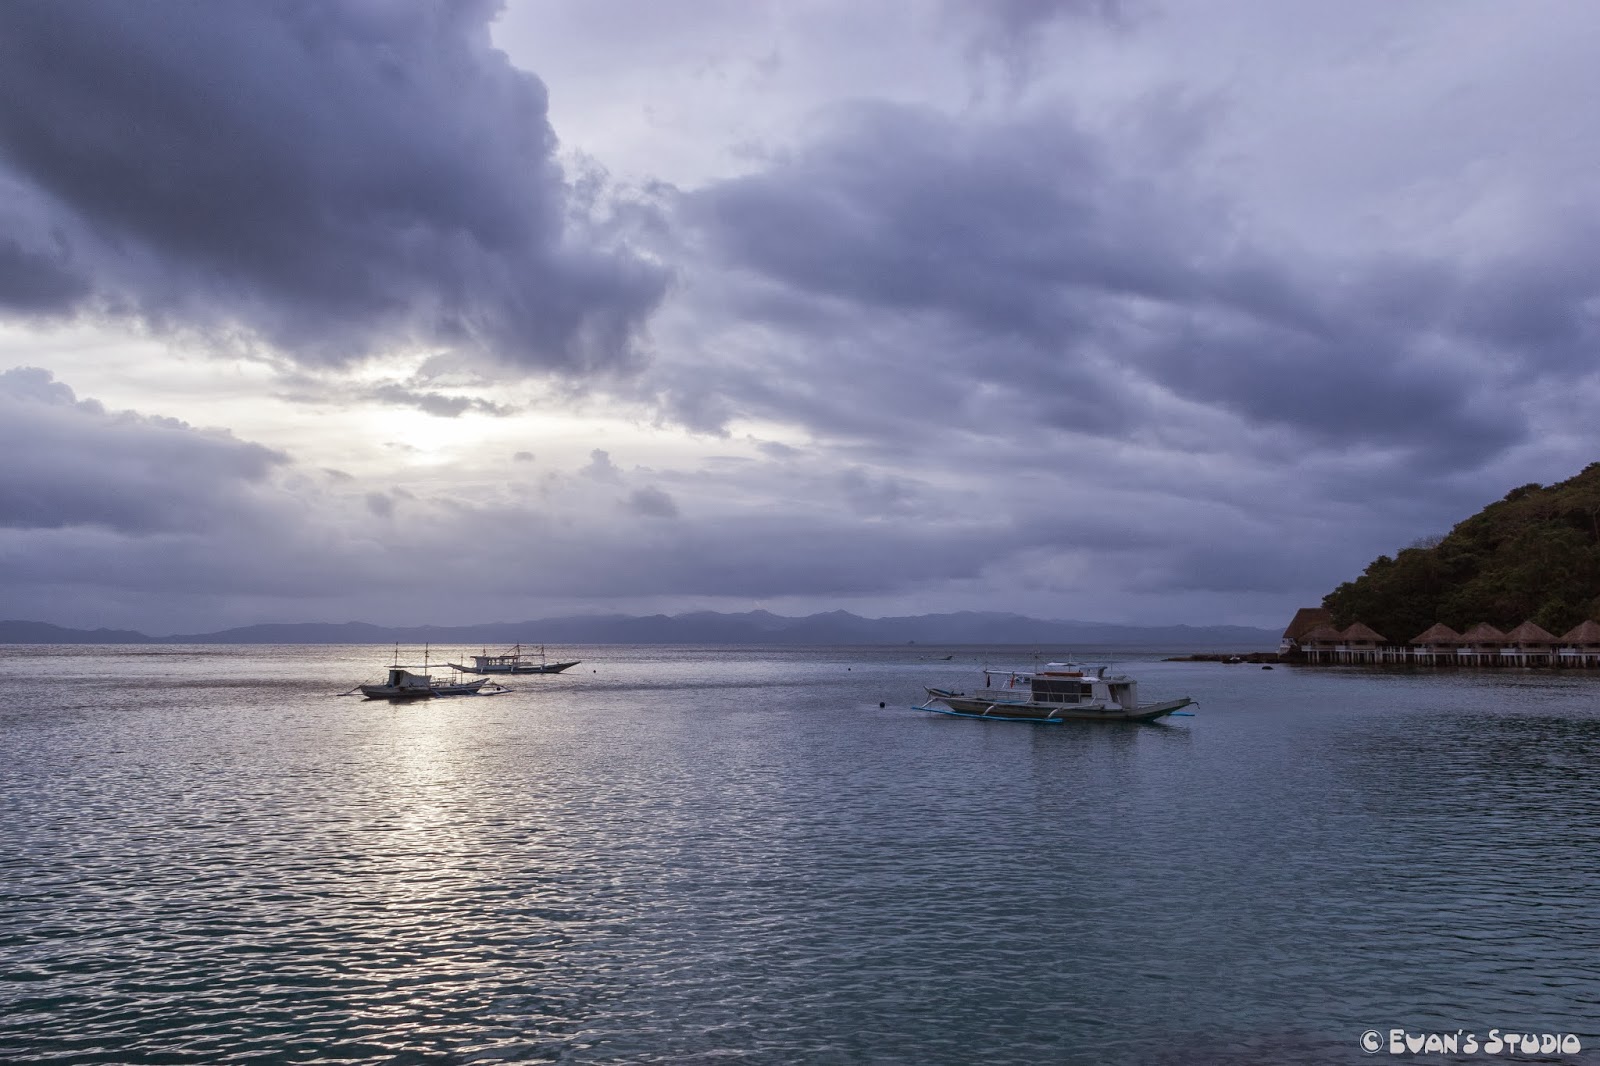 Three ships sit at the outskirts of Apulit Island Resort during dusk.